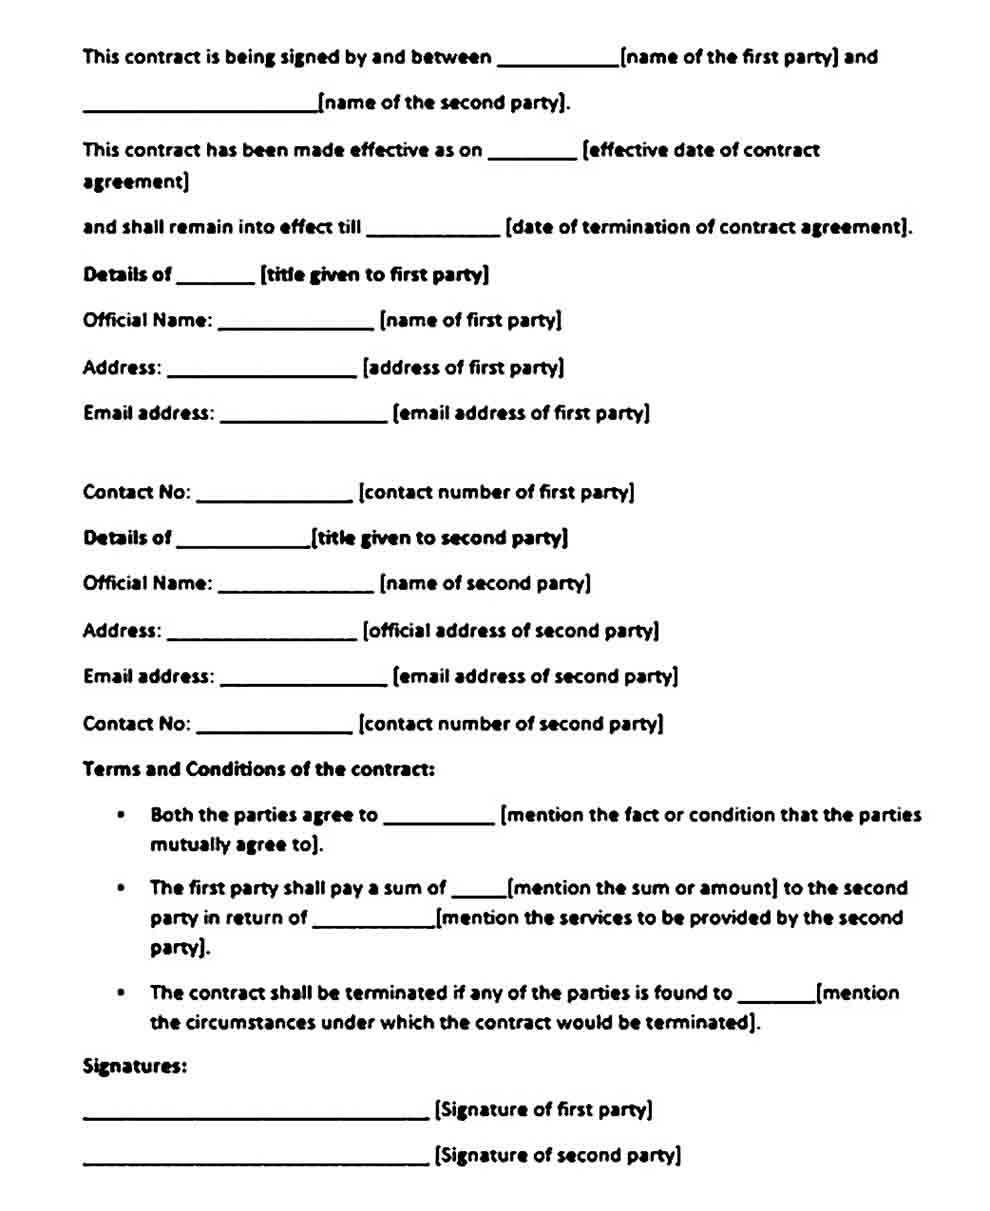 contract agreement templates word1